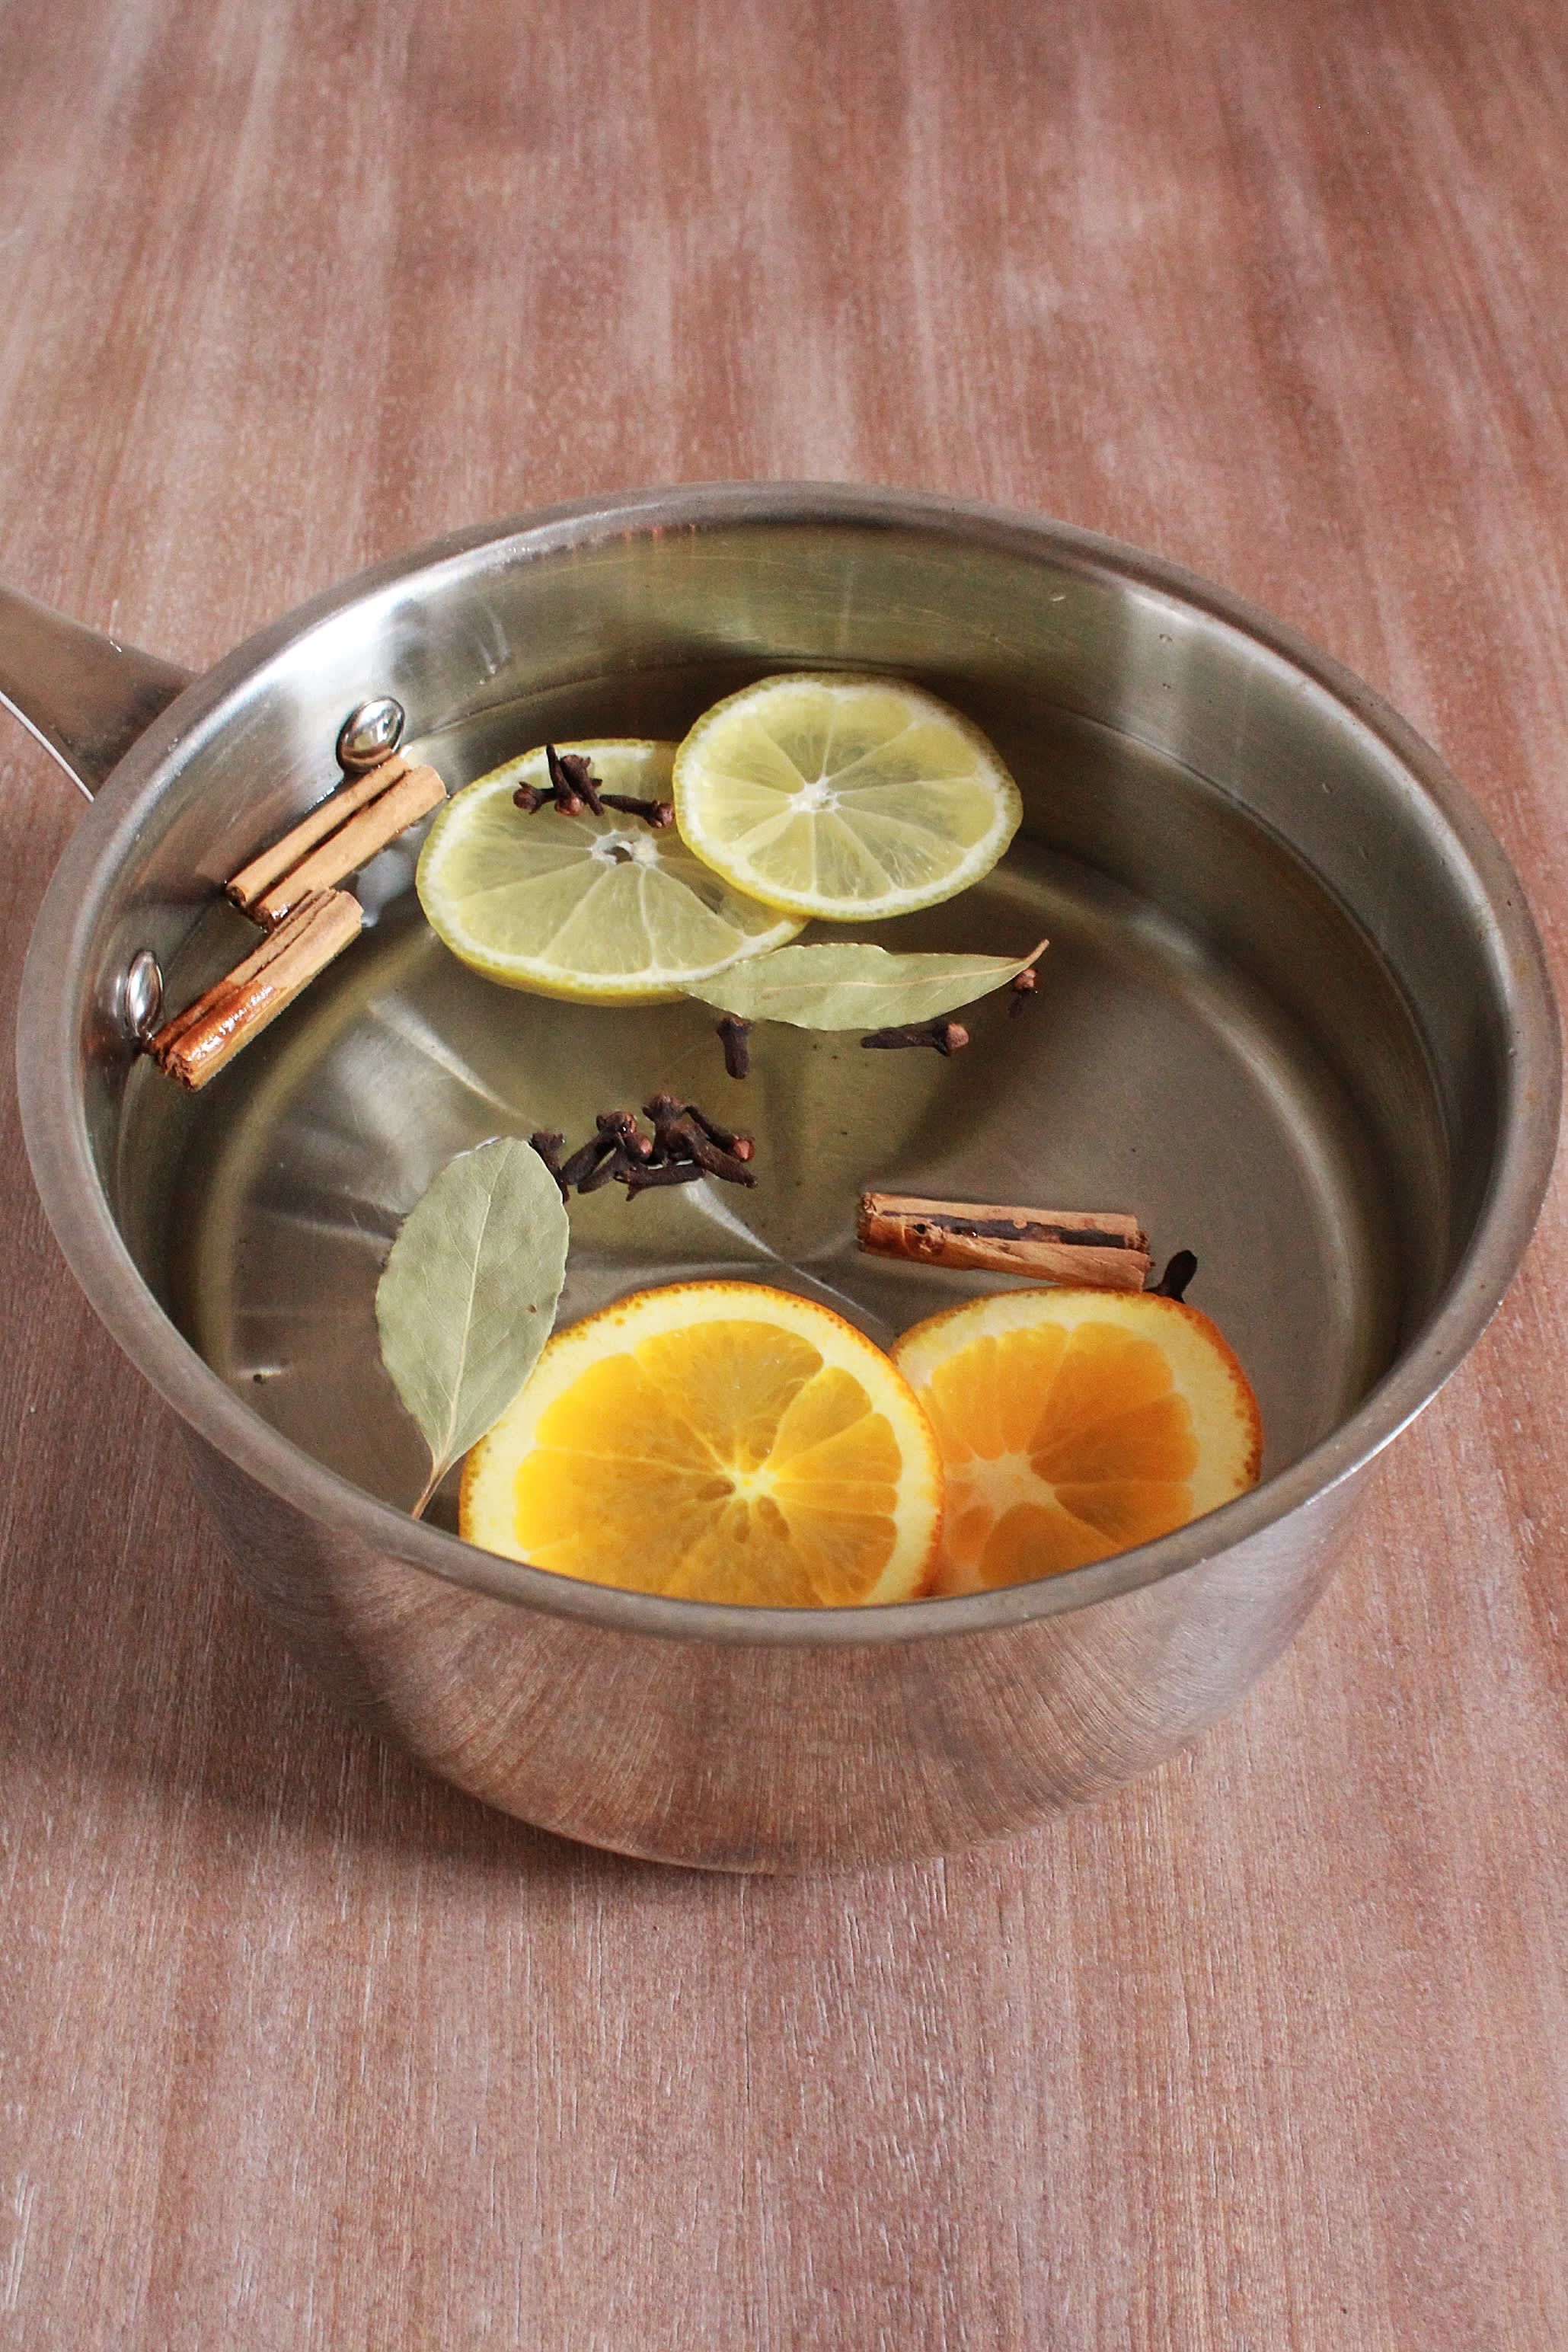 Easy Fall Simmer Pot Recipe to Make Your Home Smell Amazing